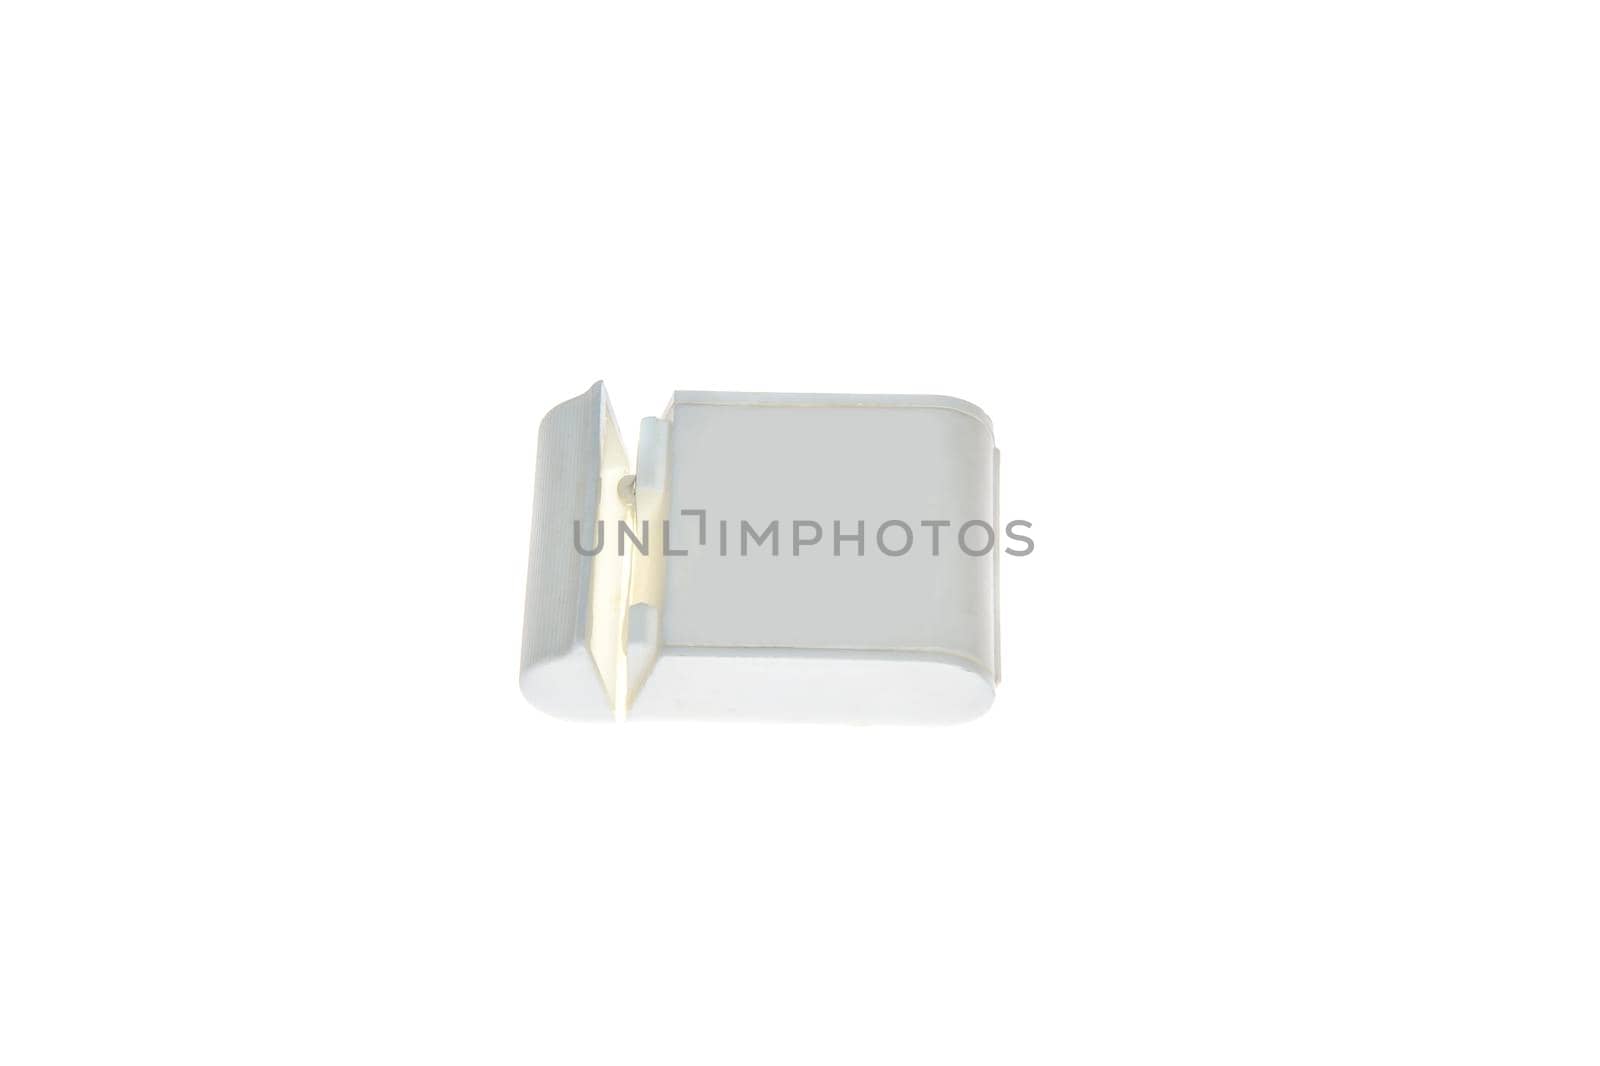 Dental Floss Hygiene Tool Box. Container With Floss Cord, Isolated on White by EdVal